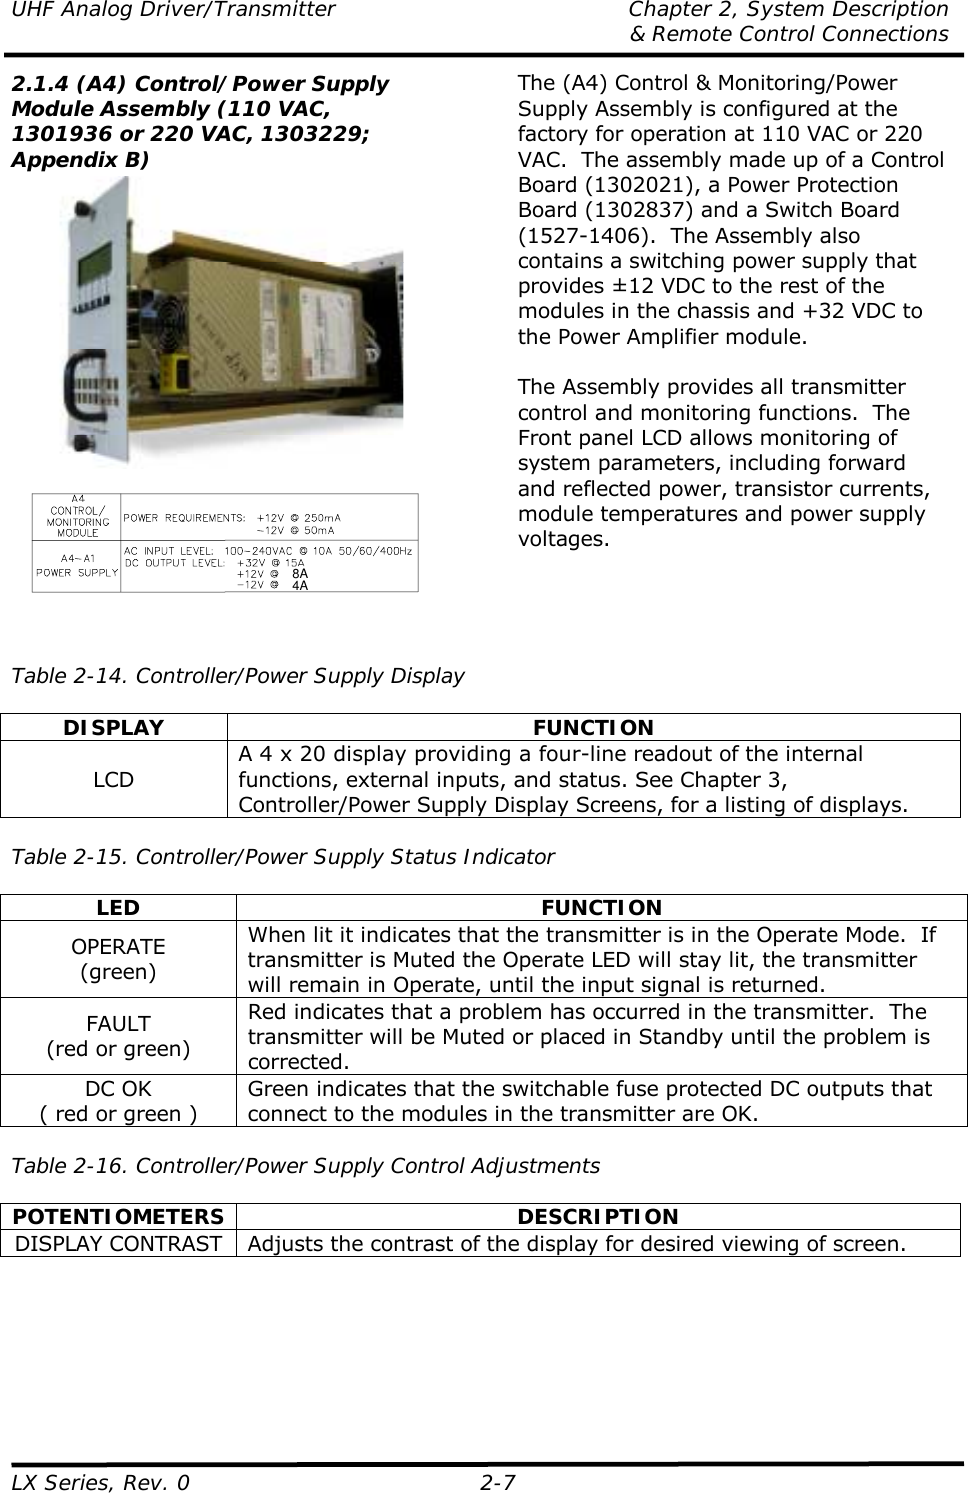 UHF Analog Driver/Transmitter  Chapter 2, System Description   &amp; Remote Control Connections LX Series, Rev. 0  2-7 2.1.4 (A4) Control/Power Supply Module Assembly (110 VAC, 1301936 or 220 VAC, 1303229; Appendix B)    8 A4 A  The (A4) Control &amp; Monitoring/Power Supply Assembly is configured at the factory for operation at 110 VAC or 220 VAC.  The assembly made up of a Control Board (1302021), a Power Protection Board (1302837) and a Switch Board (1527-1406).  The Assembly also contains a switching power supply that provides ±12 VDC to the rest of the modules in the chassis and +32 VDC to the Power Amplifier module.  The Assembly provides all transmitter control and monitoring functions.  The Front panel LCD allows monitoring of system parameters, including forward and reflected power, transistor currents, module temperatures and power supply voltages.  Table 2-14. Controller/Power Supply Display  DISPLAY FUNCTION LCD A 4 x 20 display providing a four-line readout of the internal functions, external inputs, and status. See Chapter 3, Controller/Power Supply Display Screens, for a listing of displays.  Table 2-15. Controller/Power Supply Status Indicator  LED FUNCTION OPERATE (green) When lit it indicates that the transmitter is in the Operate Mode.  If transmitter is Muted the Operate LED will stay lit, the transmitter will remain in Operate, until the input signal is returned. FAULT (red or green) Red indicates that a problem has occurred in the transmitter.  The transmitter will be Muted or placed in Standby until the problem is corrected. DC OK ( red or green ) Green indicates that the switchable fuse protected DC outputs that connect to the modules in the transmitter are OK.  Table 2-16. Controller/Power Supply Control Adjustments  POTENTIOMETERS DESCRIPTION DISPLAY CONTRAST  Adjusts the contrast of the display for desired viewing of screen.  